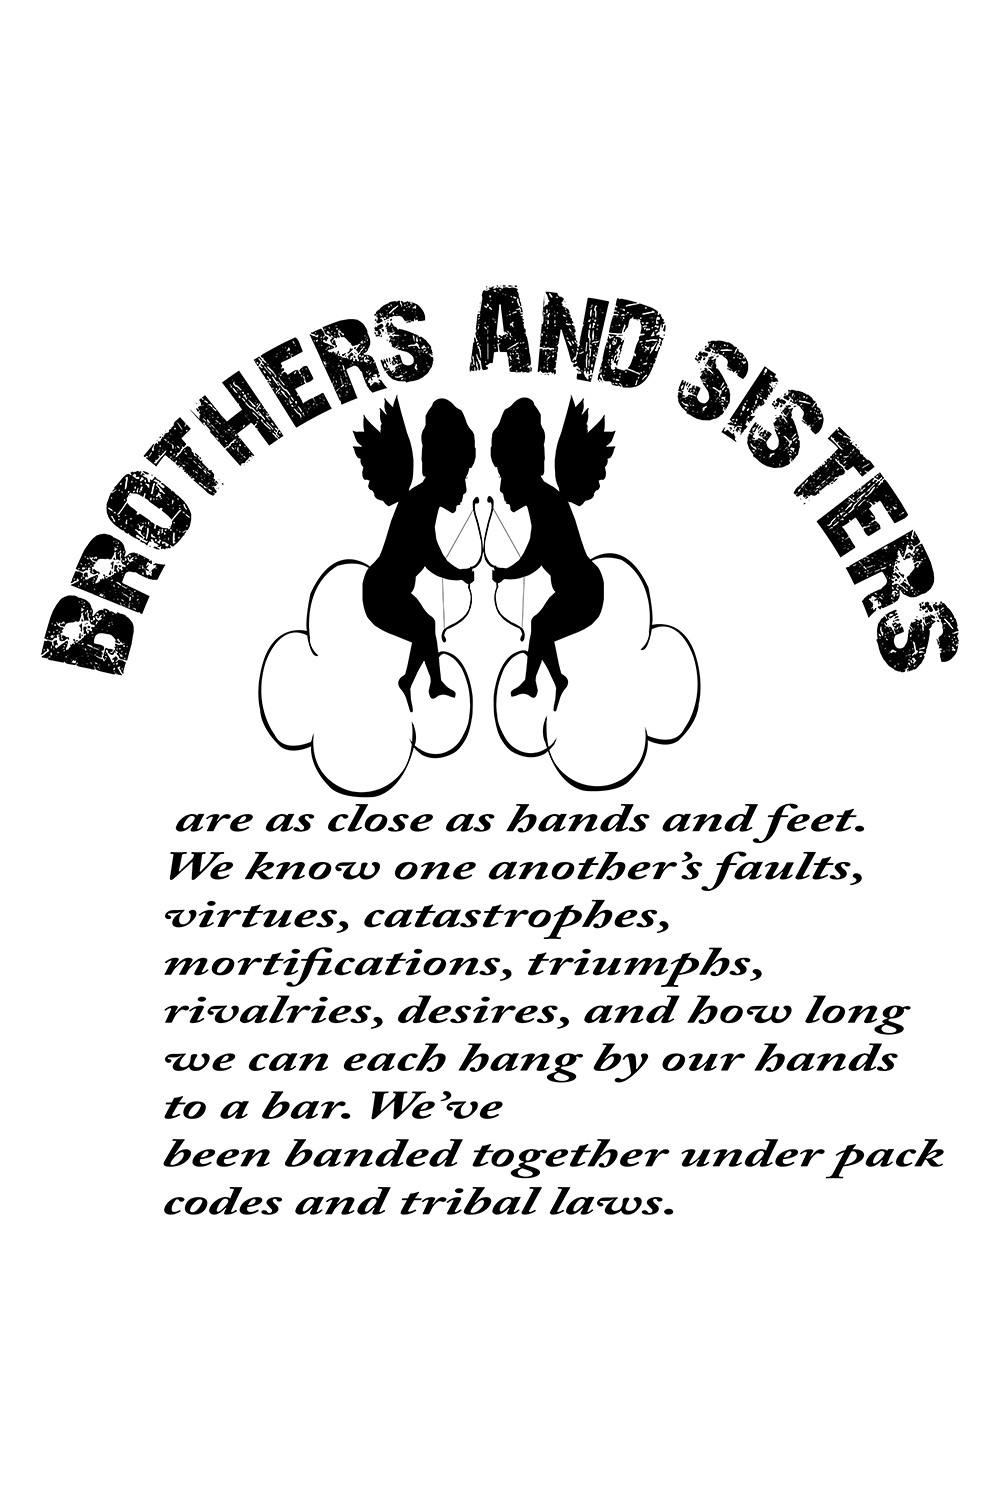 Brother and sister t-shart design pinterest preview image.